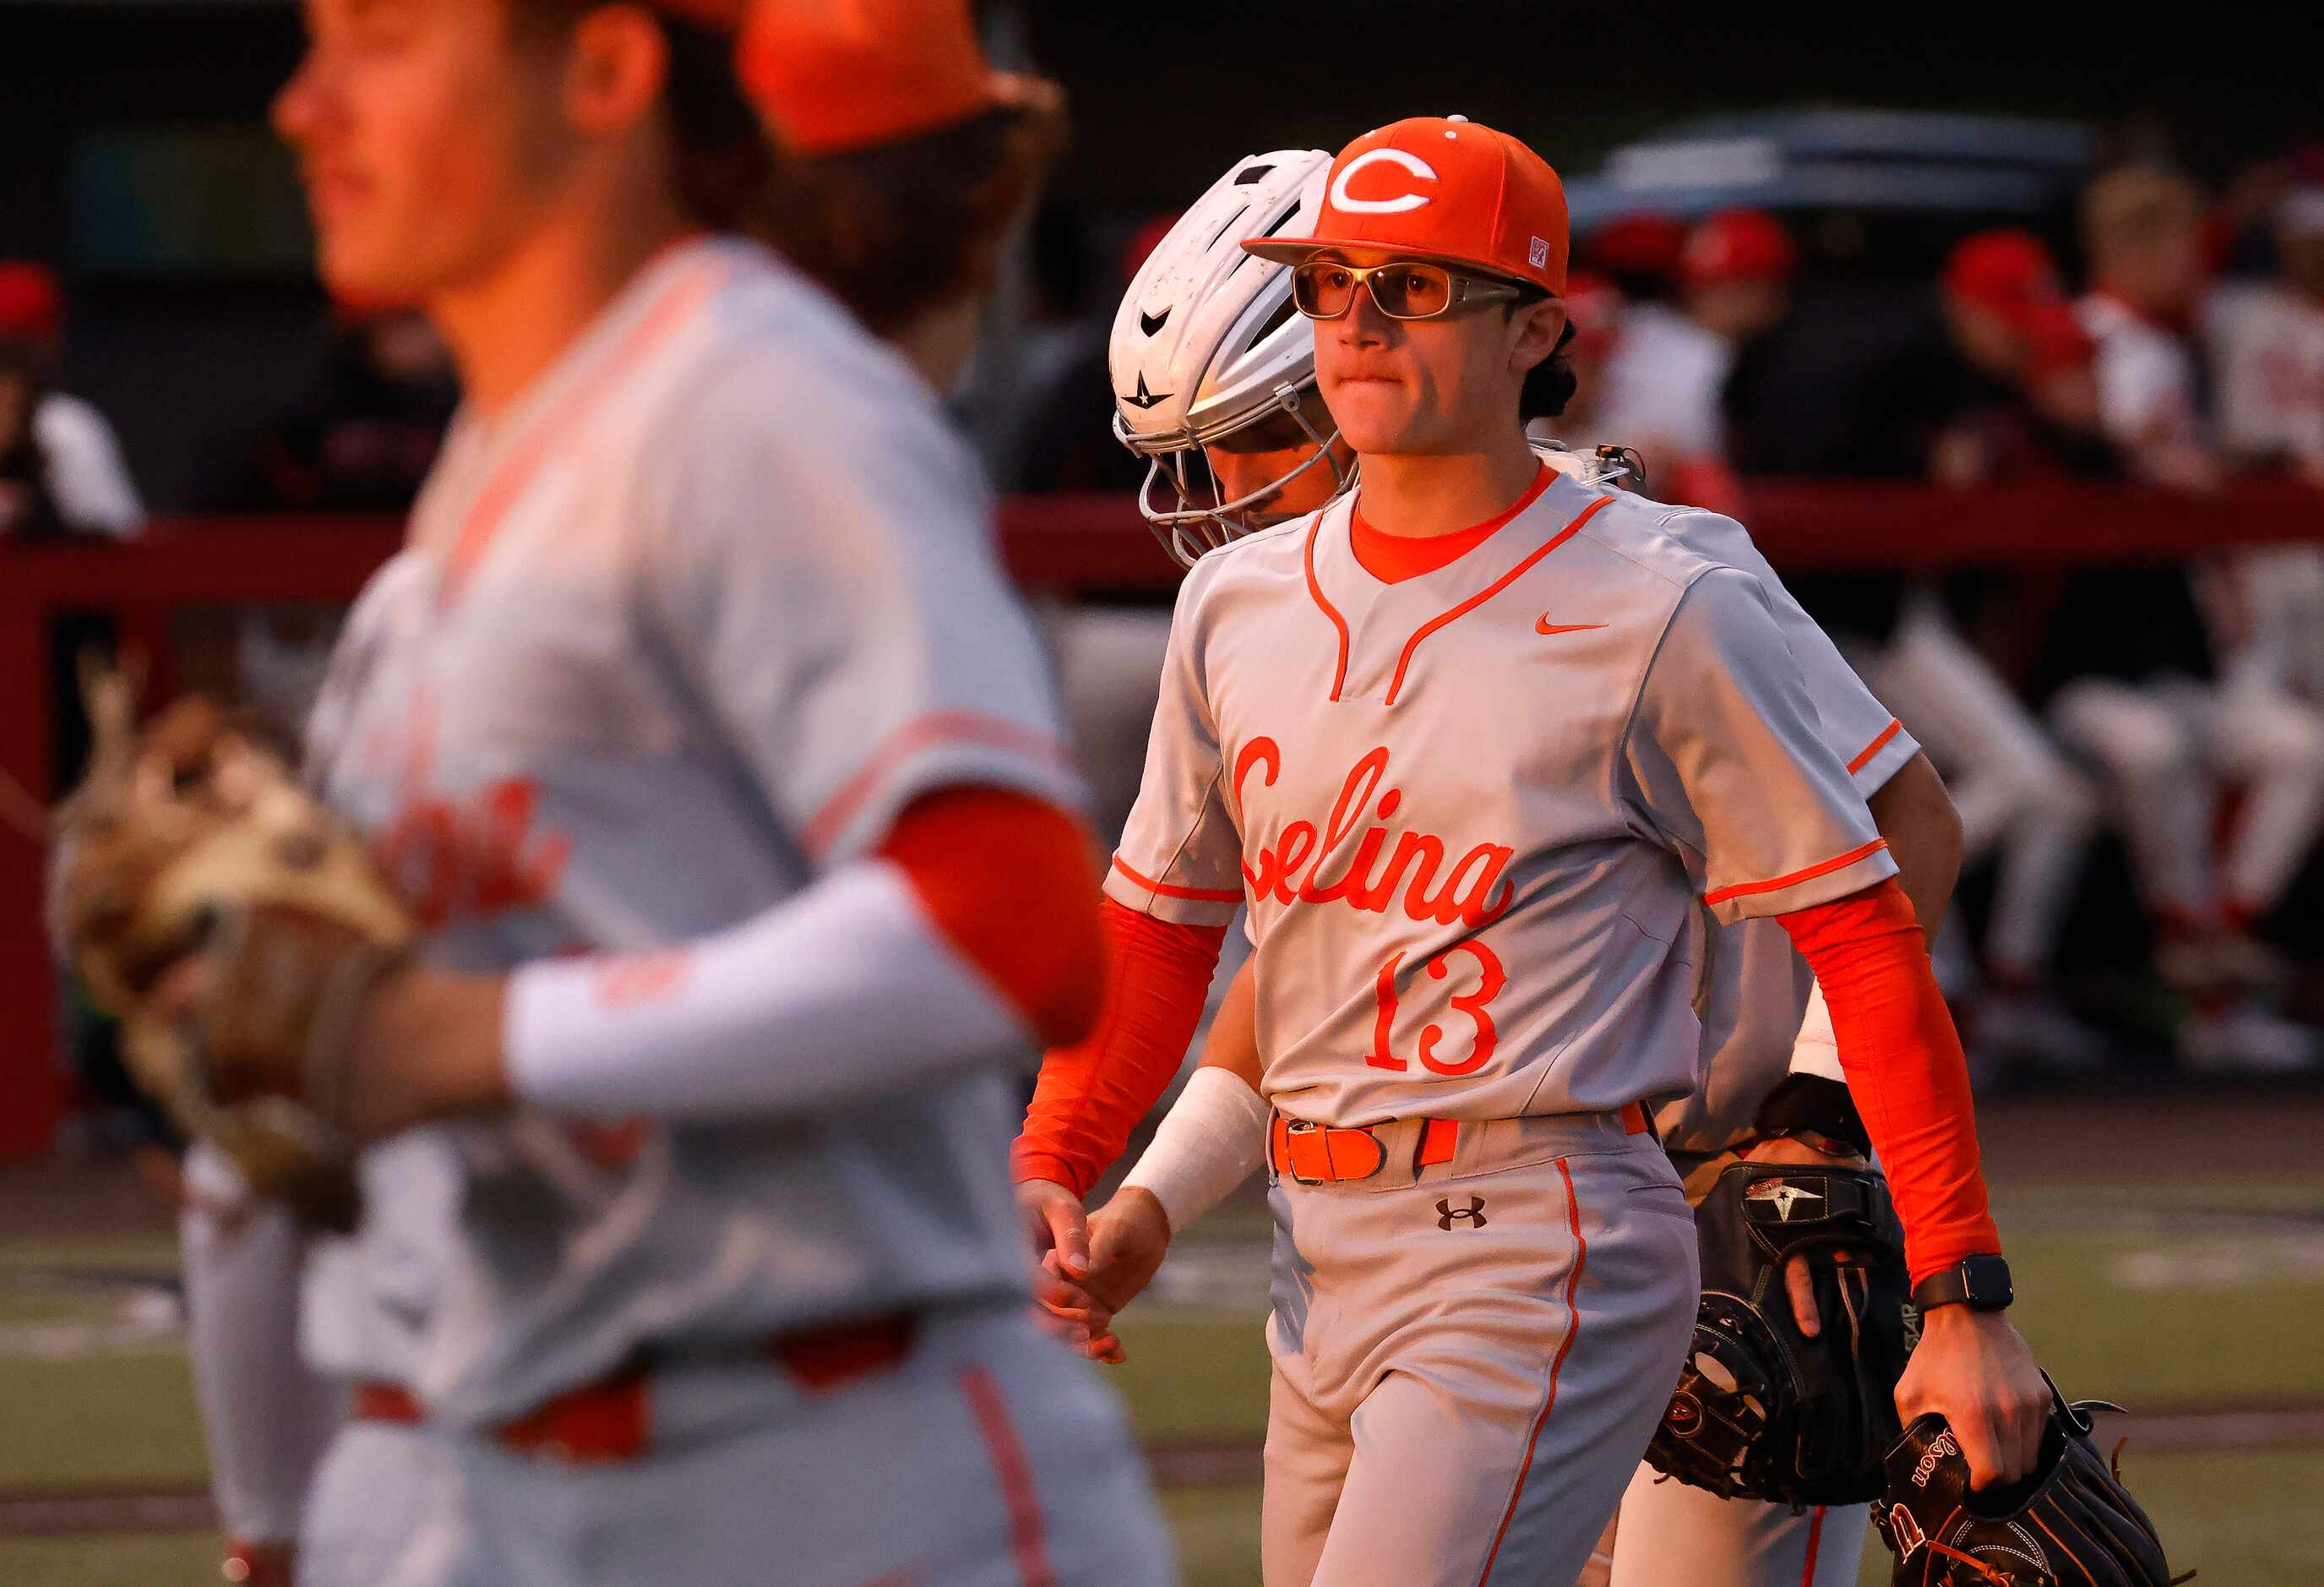 Celina High starting pitcher Brady Broeckel (13) walks off the mound after throwing in the...